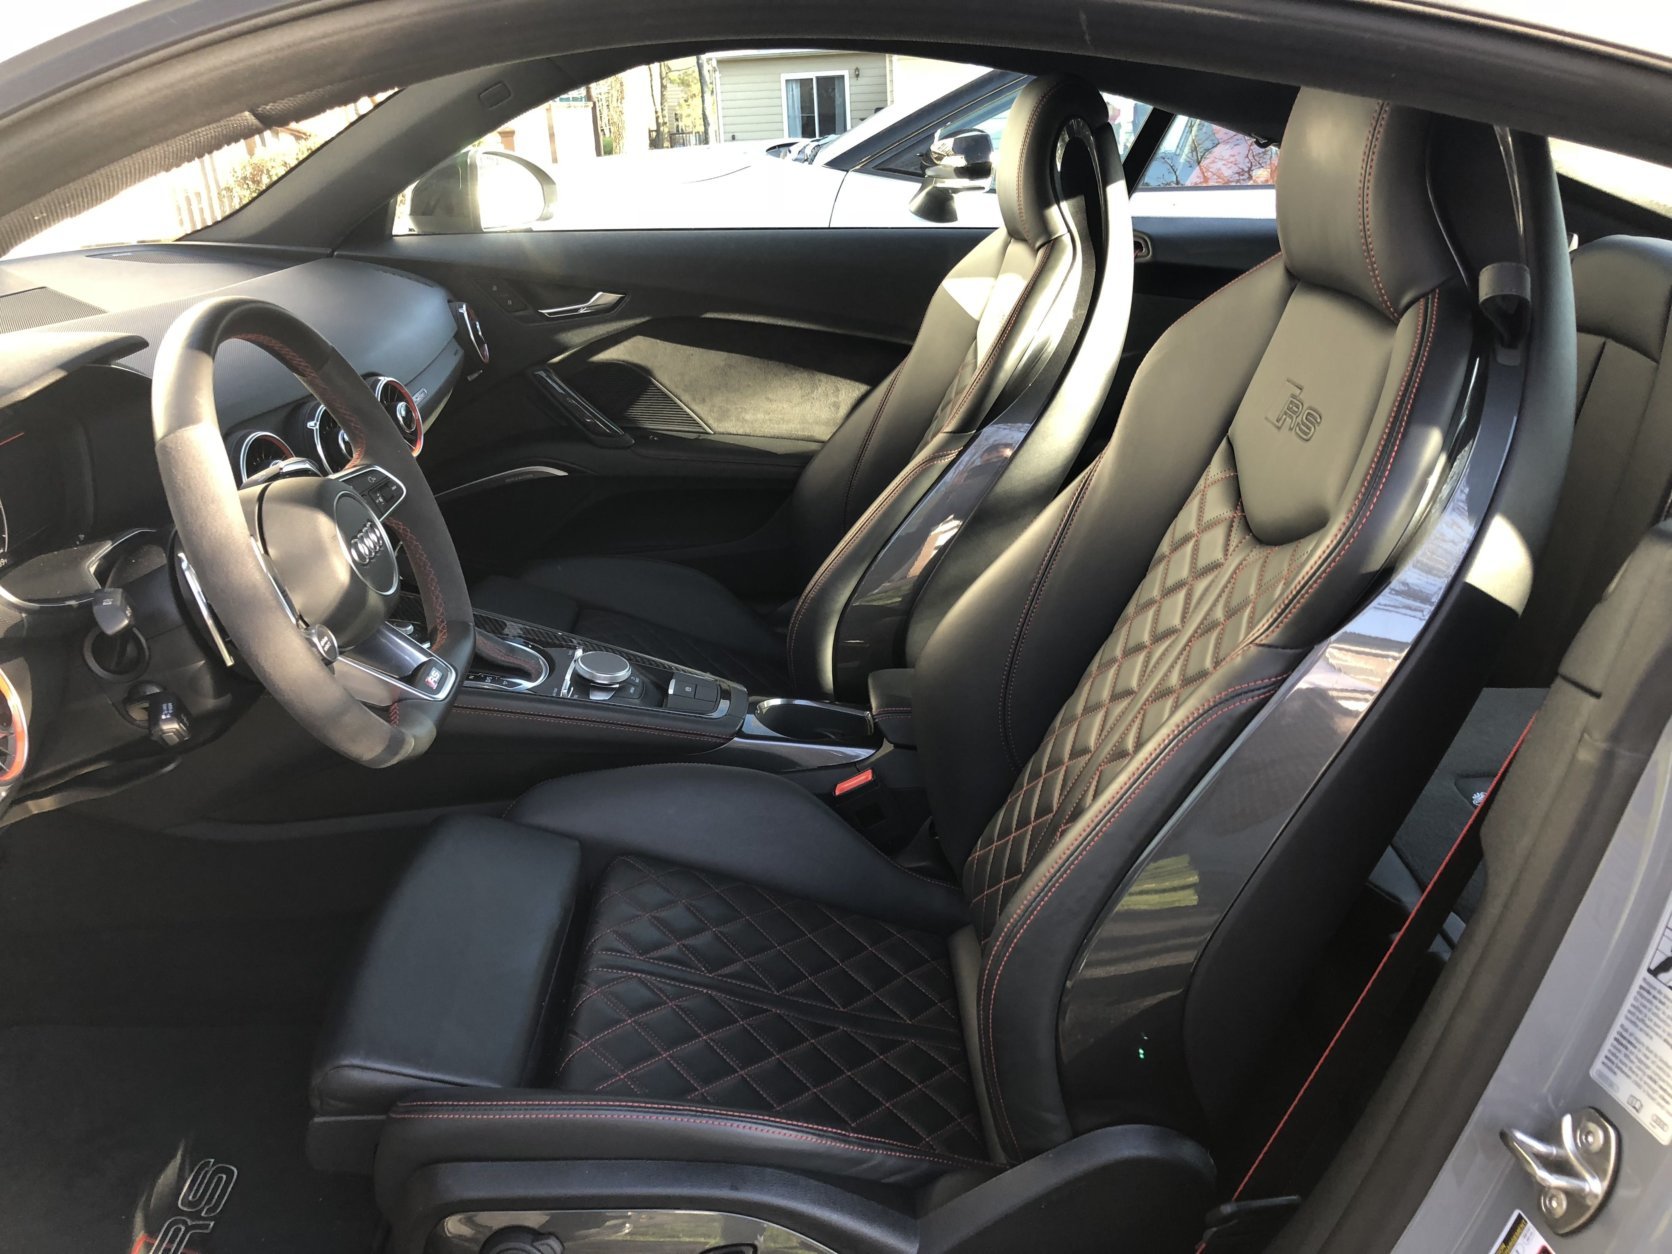 The interior isn’t some stripped out shell in the name of speed. The Audi has speed and luxury trimming inside. High quality Nappa leather seats hug your body and keep you in place in turns. (WTOP/Mike Parris)